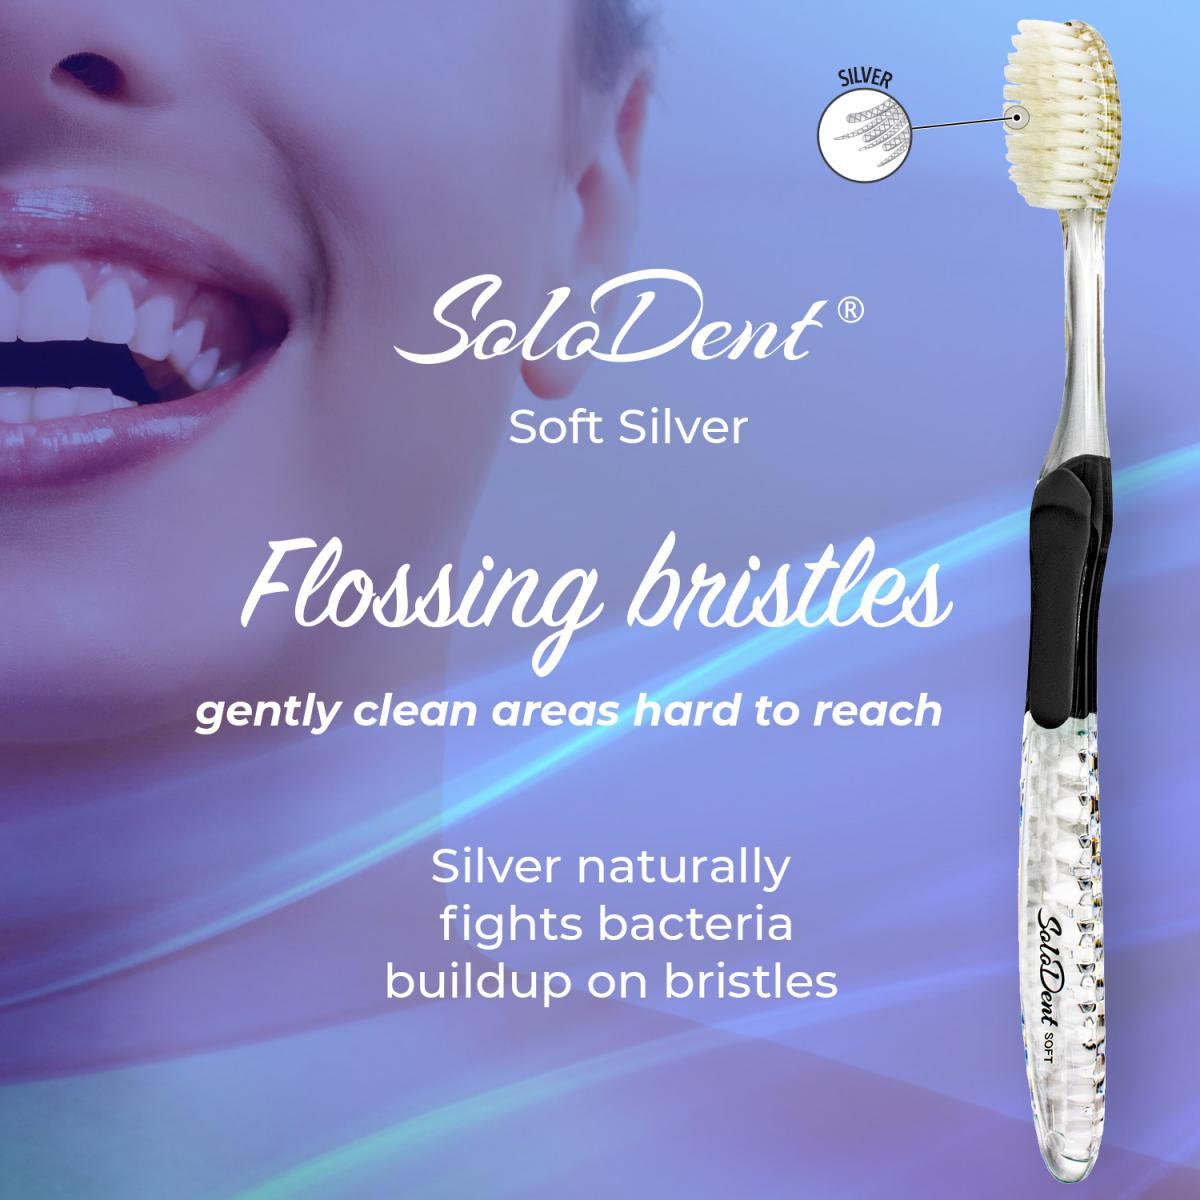 Solodent toothbrush antimicrobial silver infused soft bristles.Best for sensitive teeth, gums, braces, implants